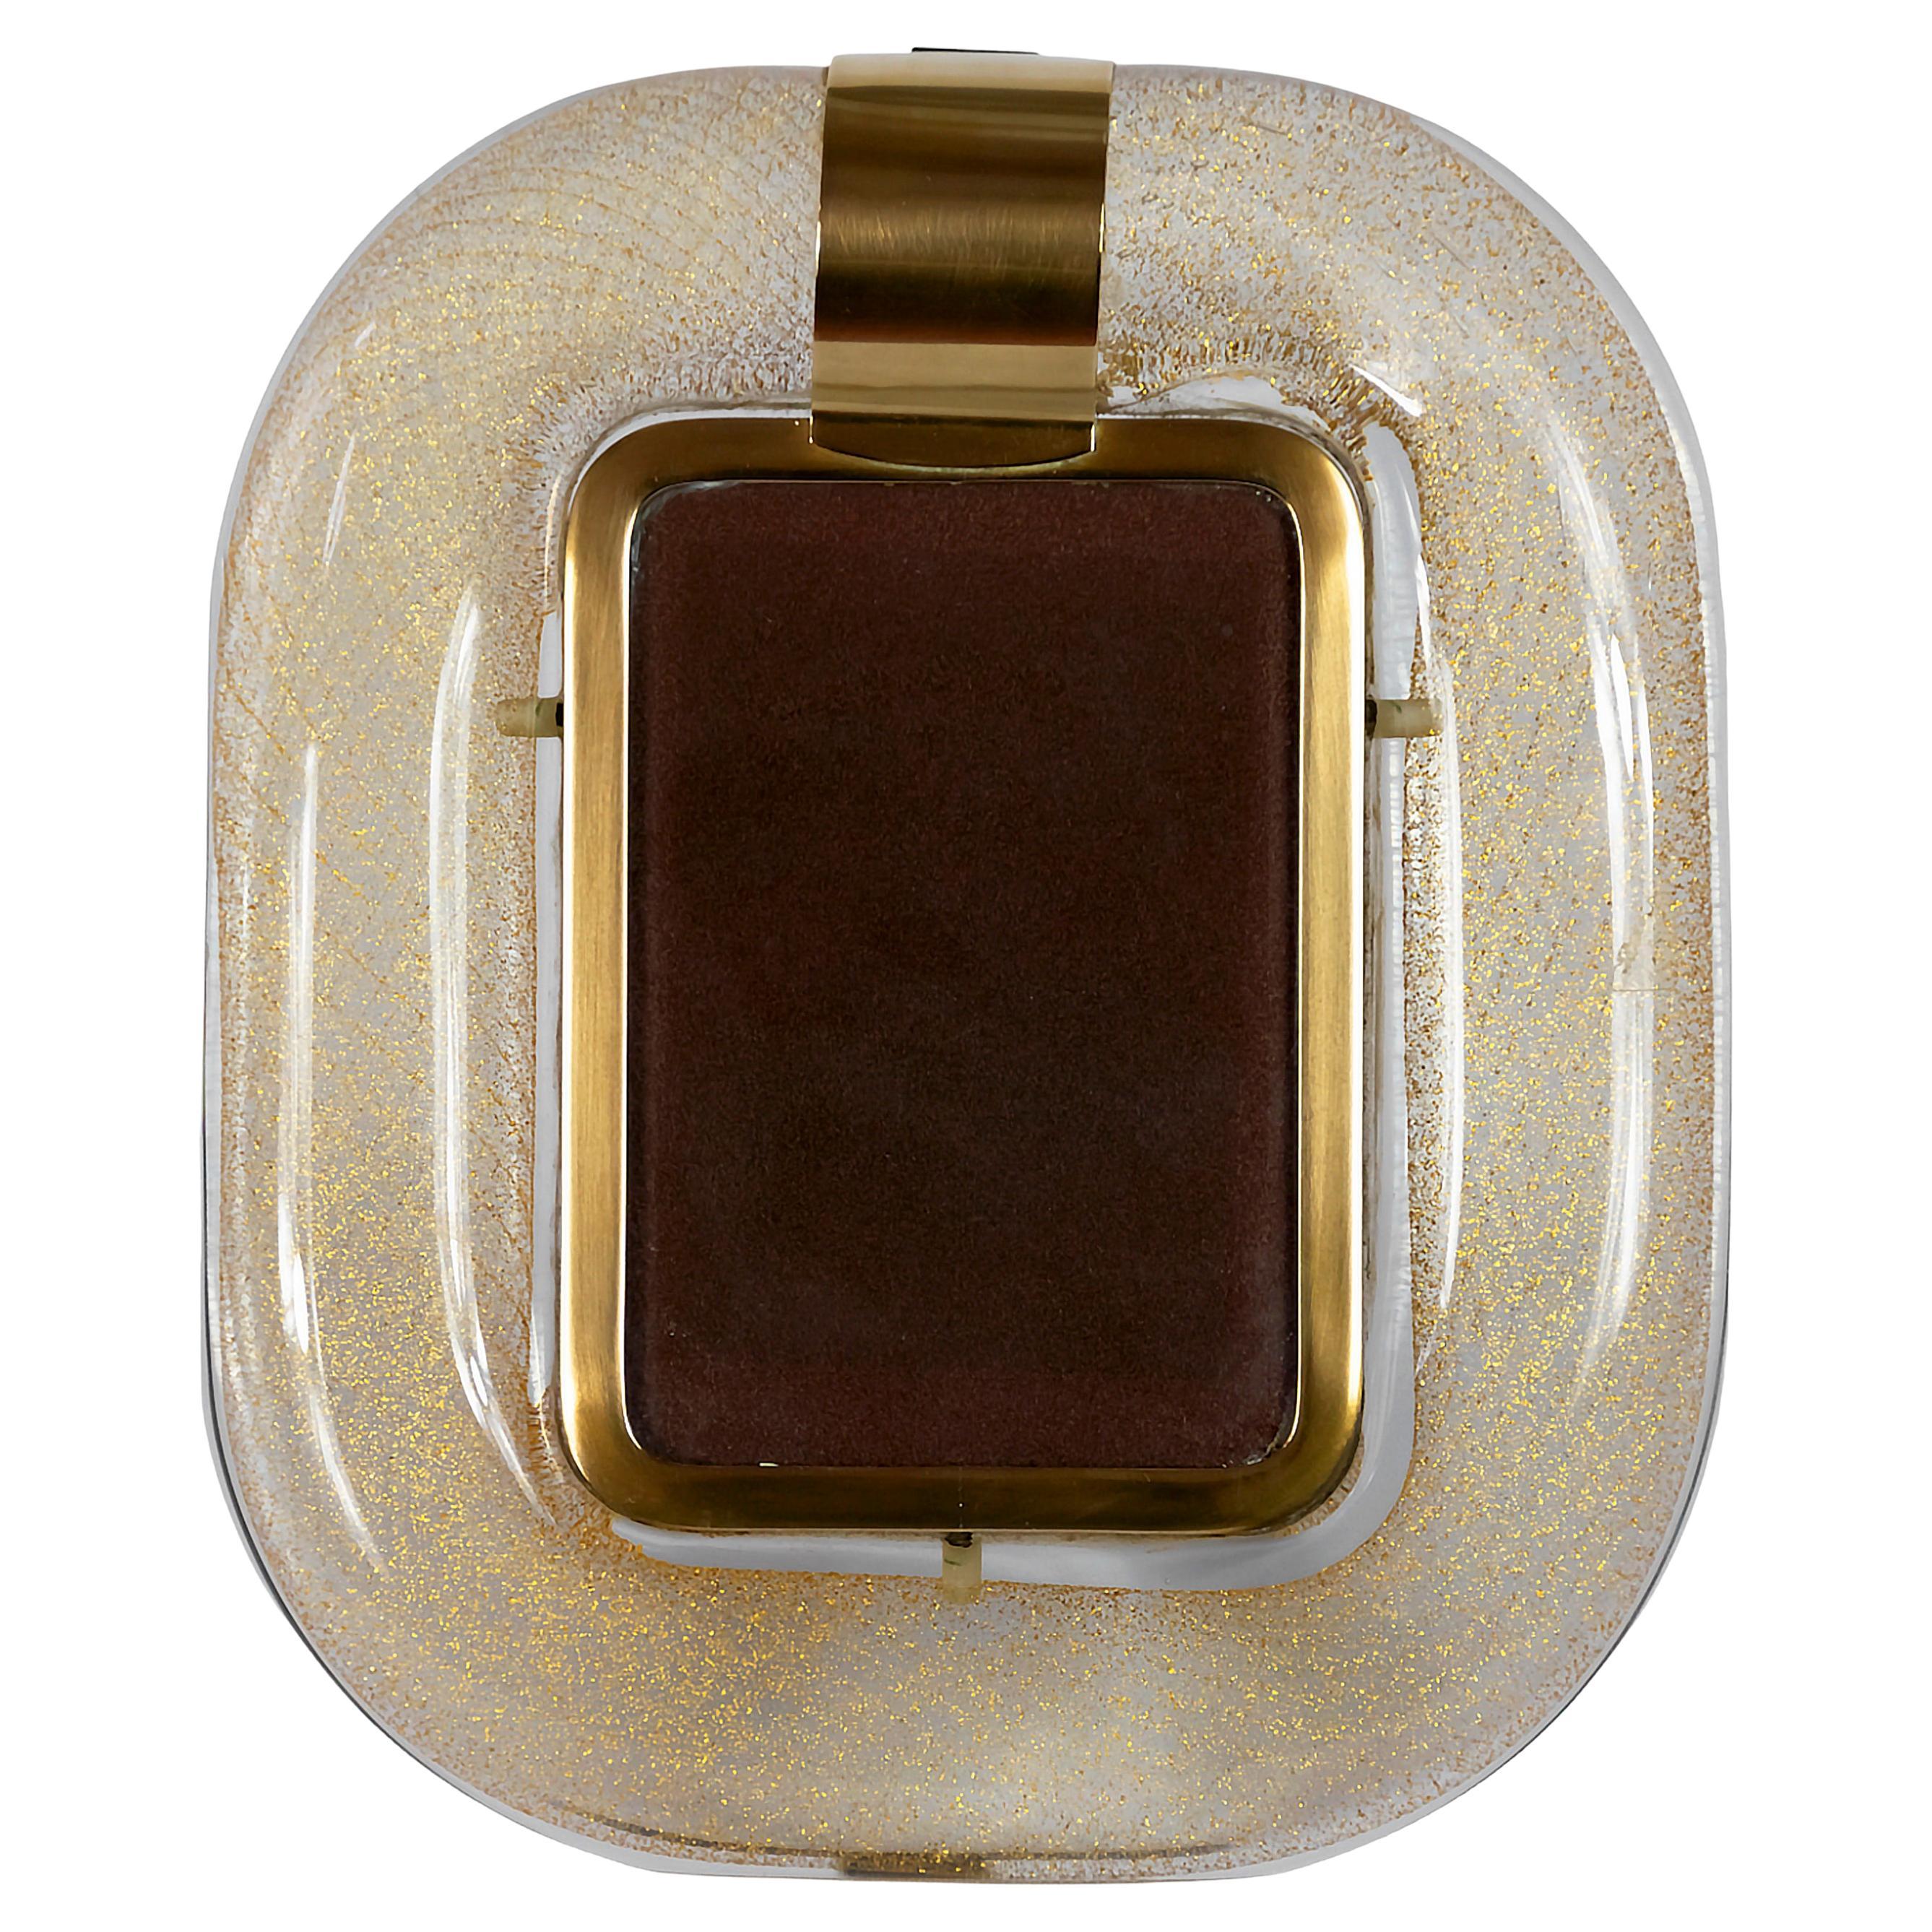 Italian Murano blown glass and brass photo frame by Tommaso Barbi from 1960's.
The glass is handmade, blown, transparent with gold dust inside.
Signed Tommaso Barbi made in Italy.
Very good condition.
 